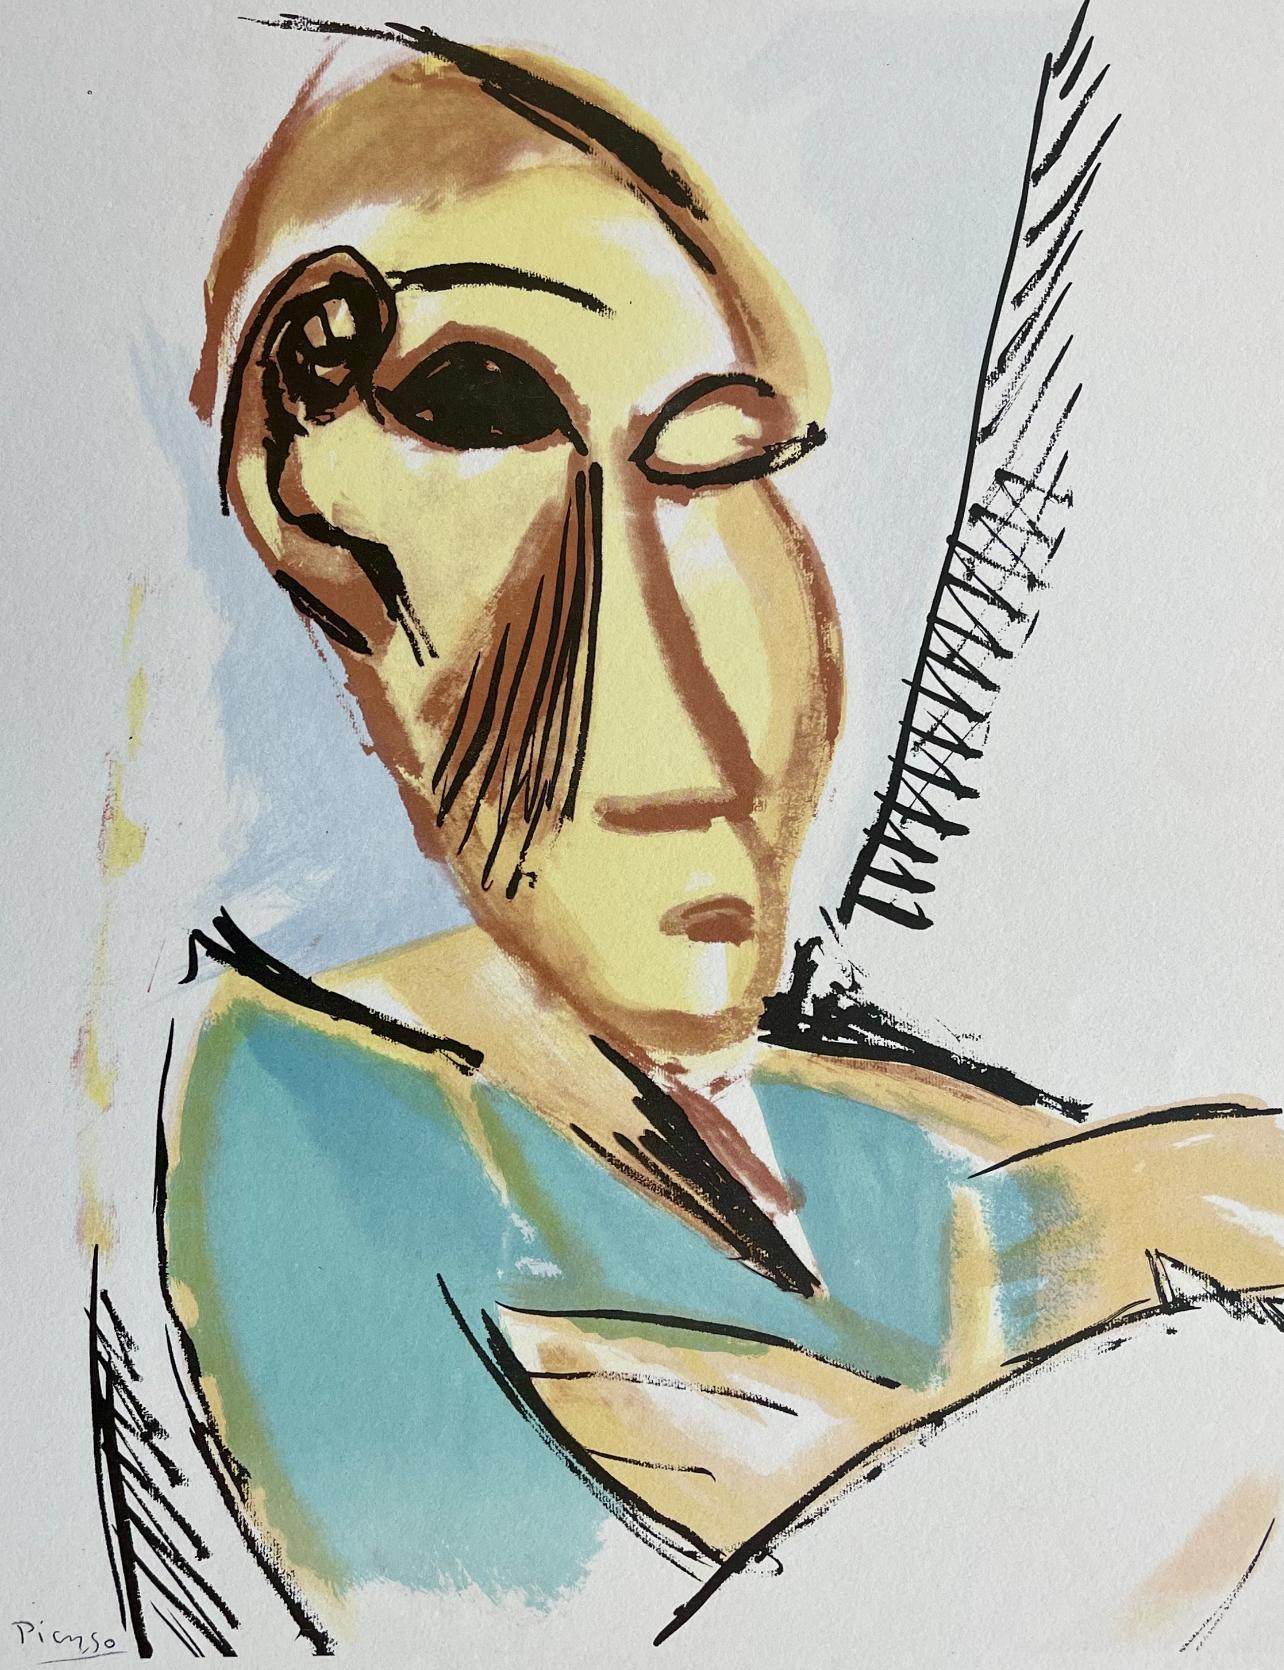 Pablo Picasso Figurative Print - Picasso, Study for Les Demoiselles D'Avignon, Picasso: Fifteen Drawings (after)